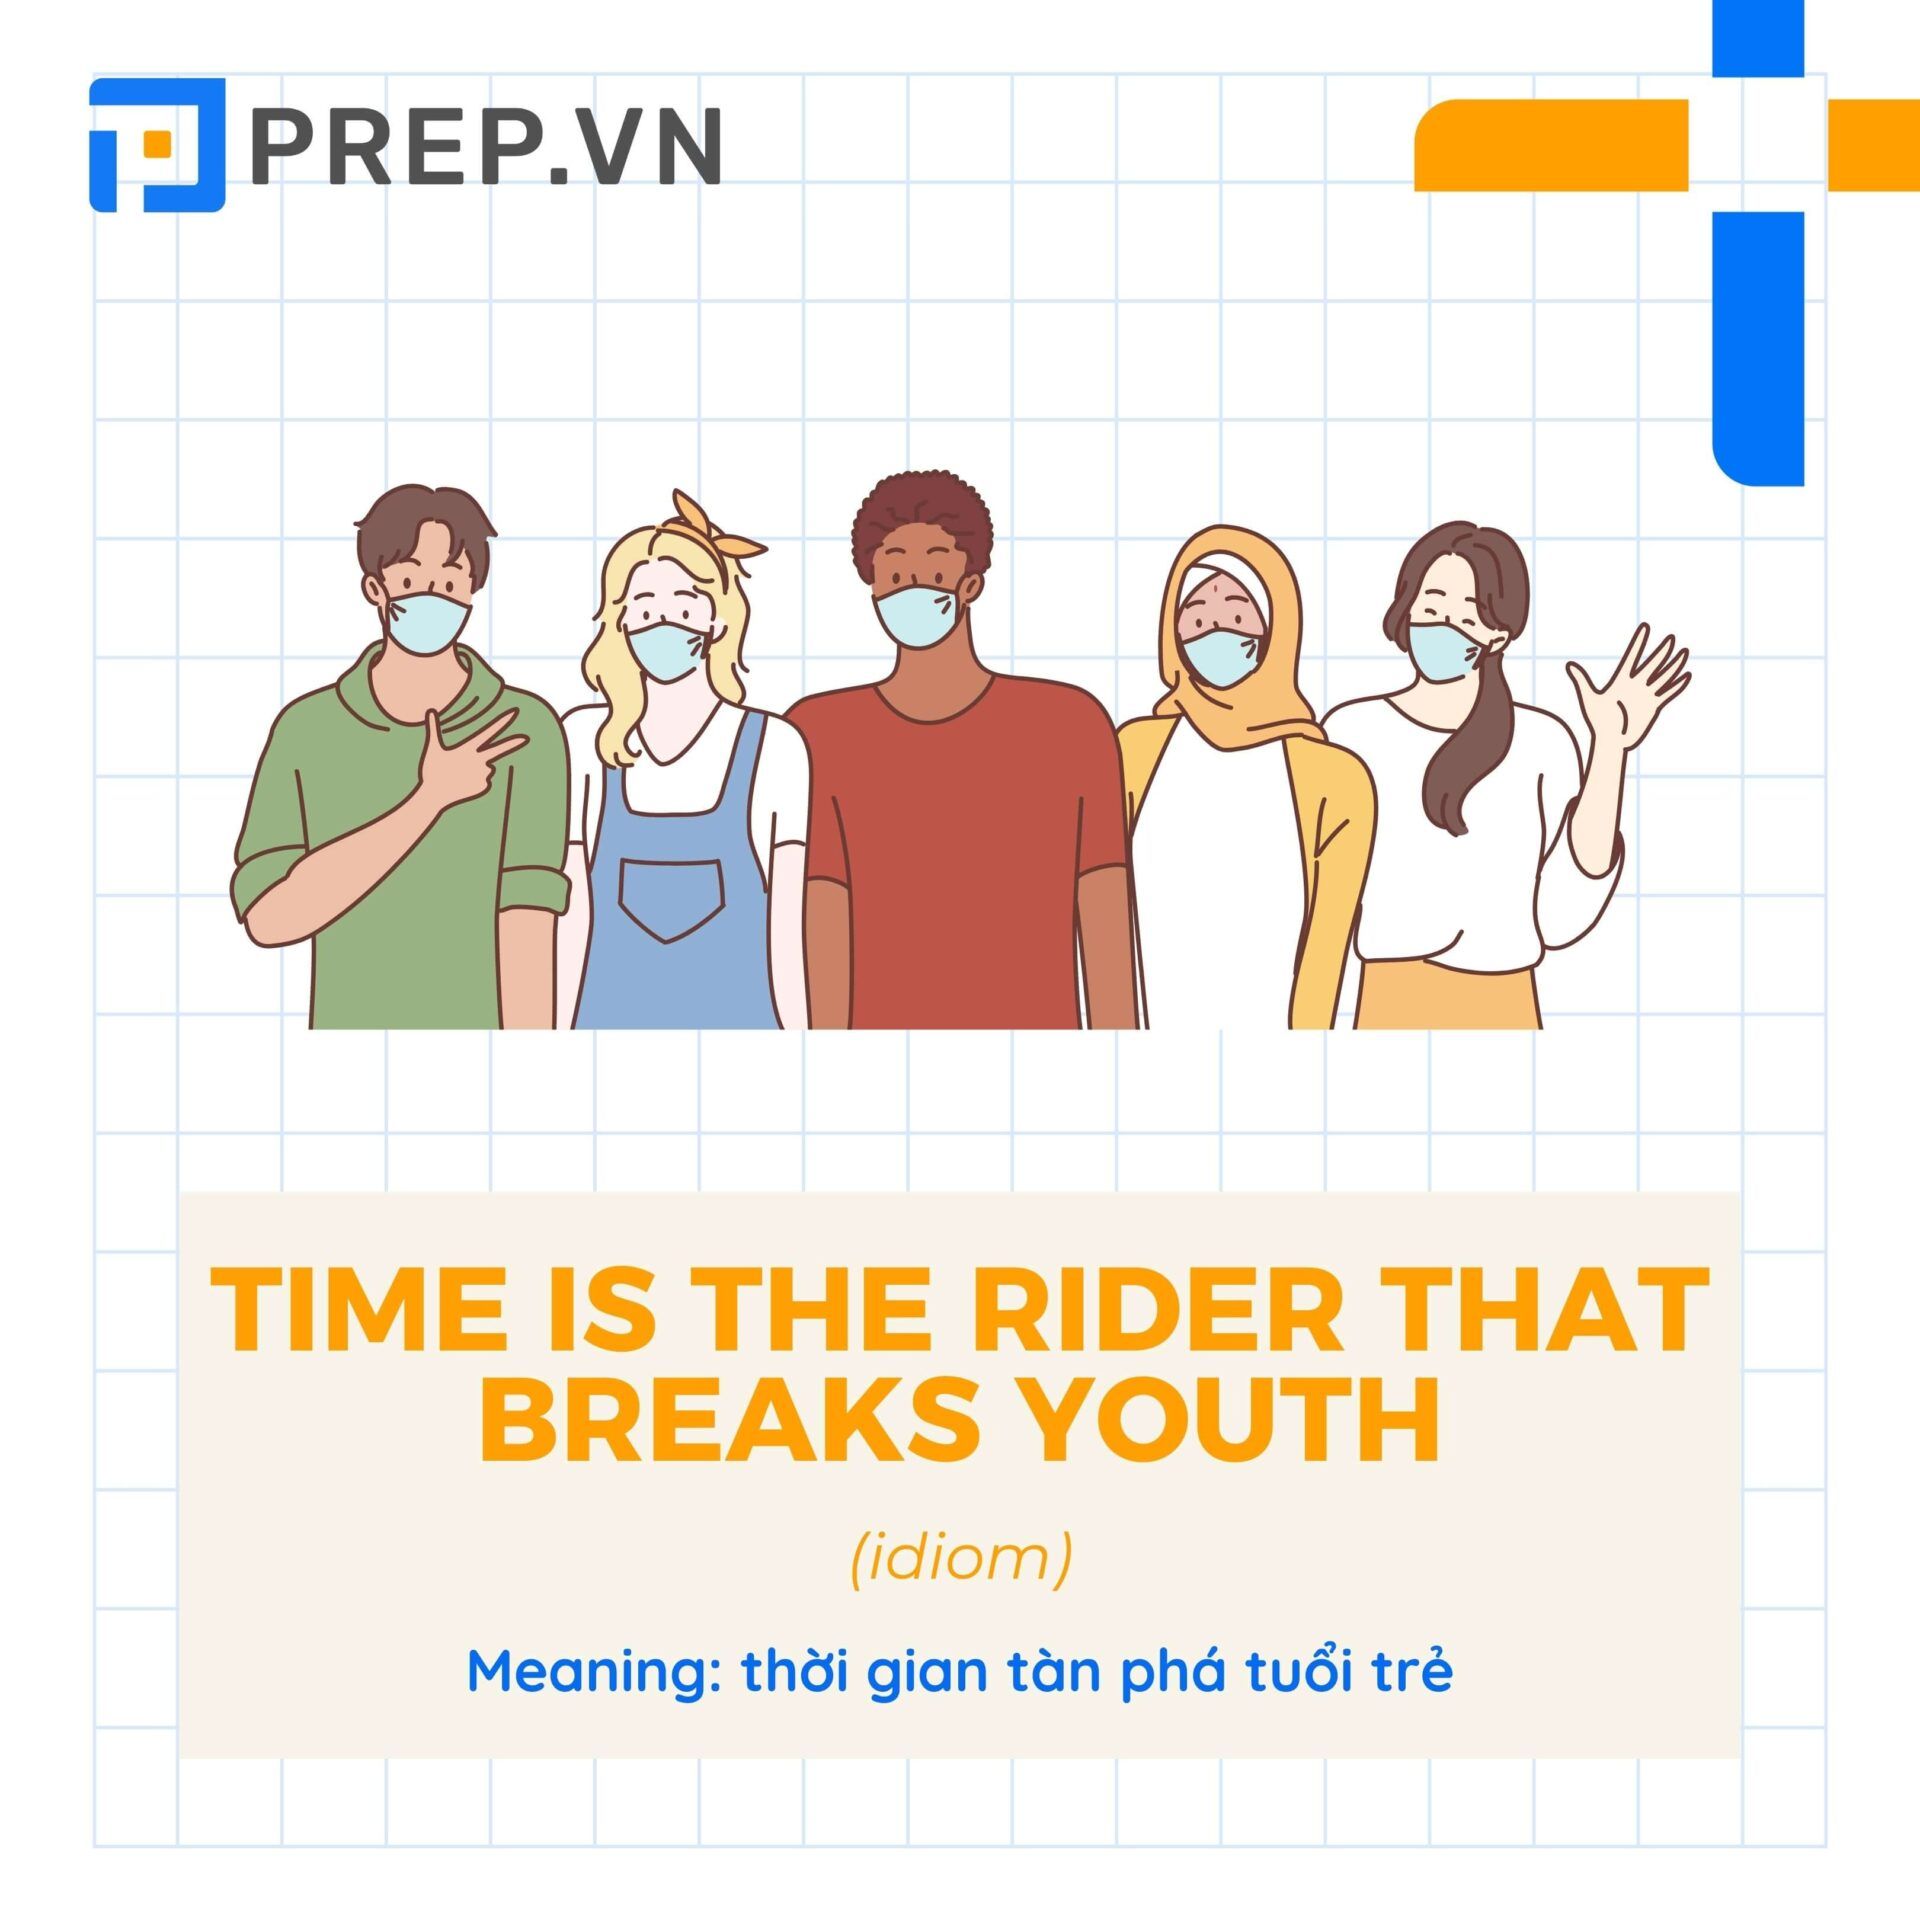 Time is the rider that breaks youth